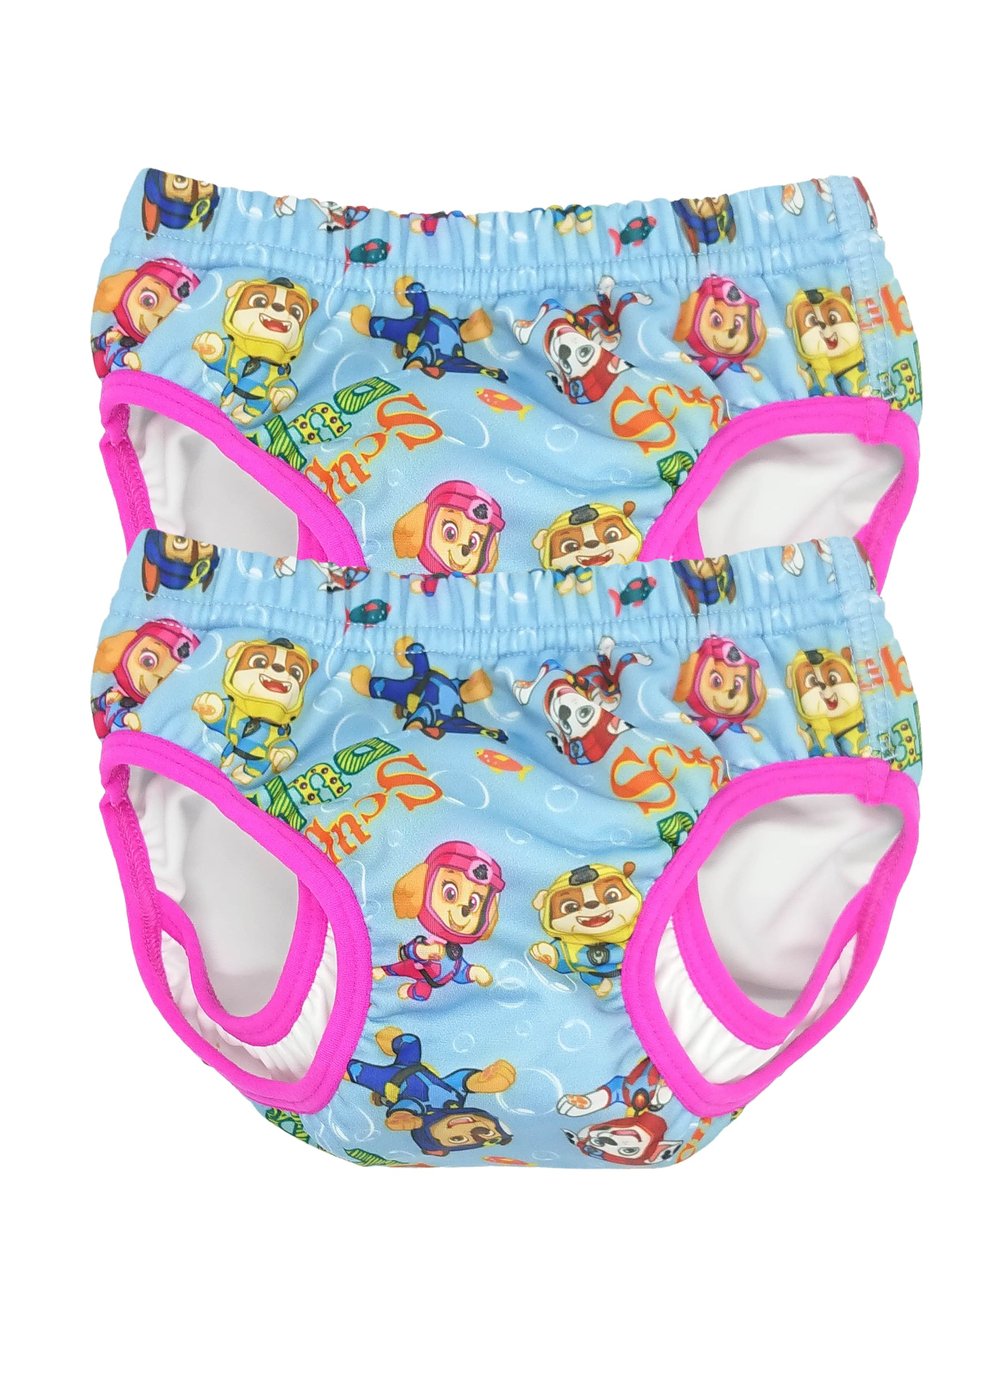 PAW Patrol X Small Pack of 2 Swim Pants Review